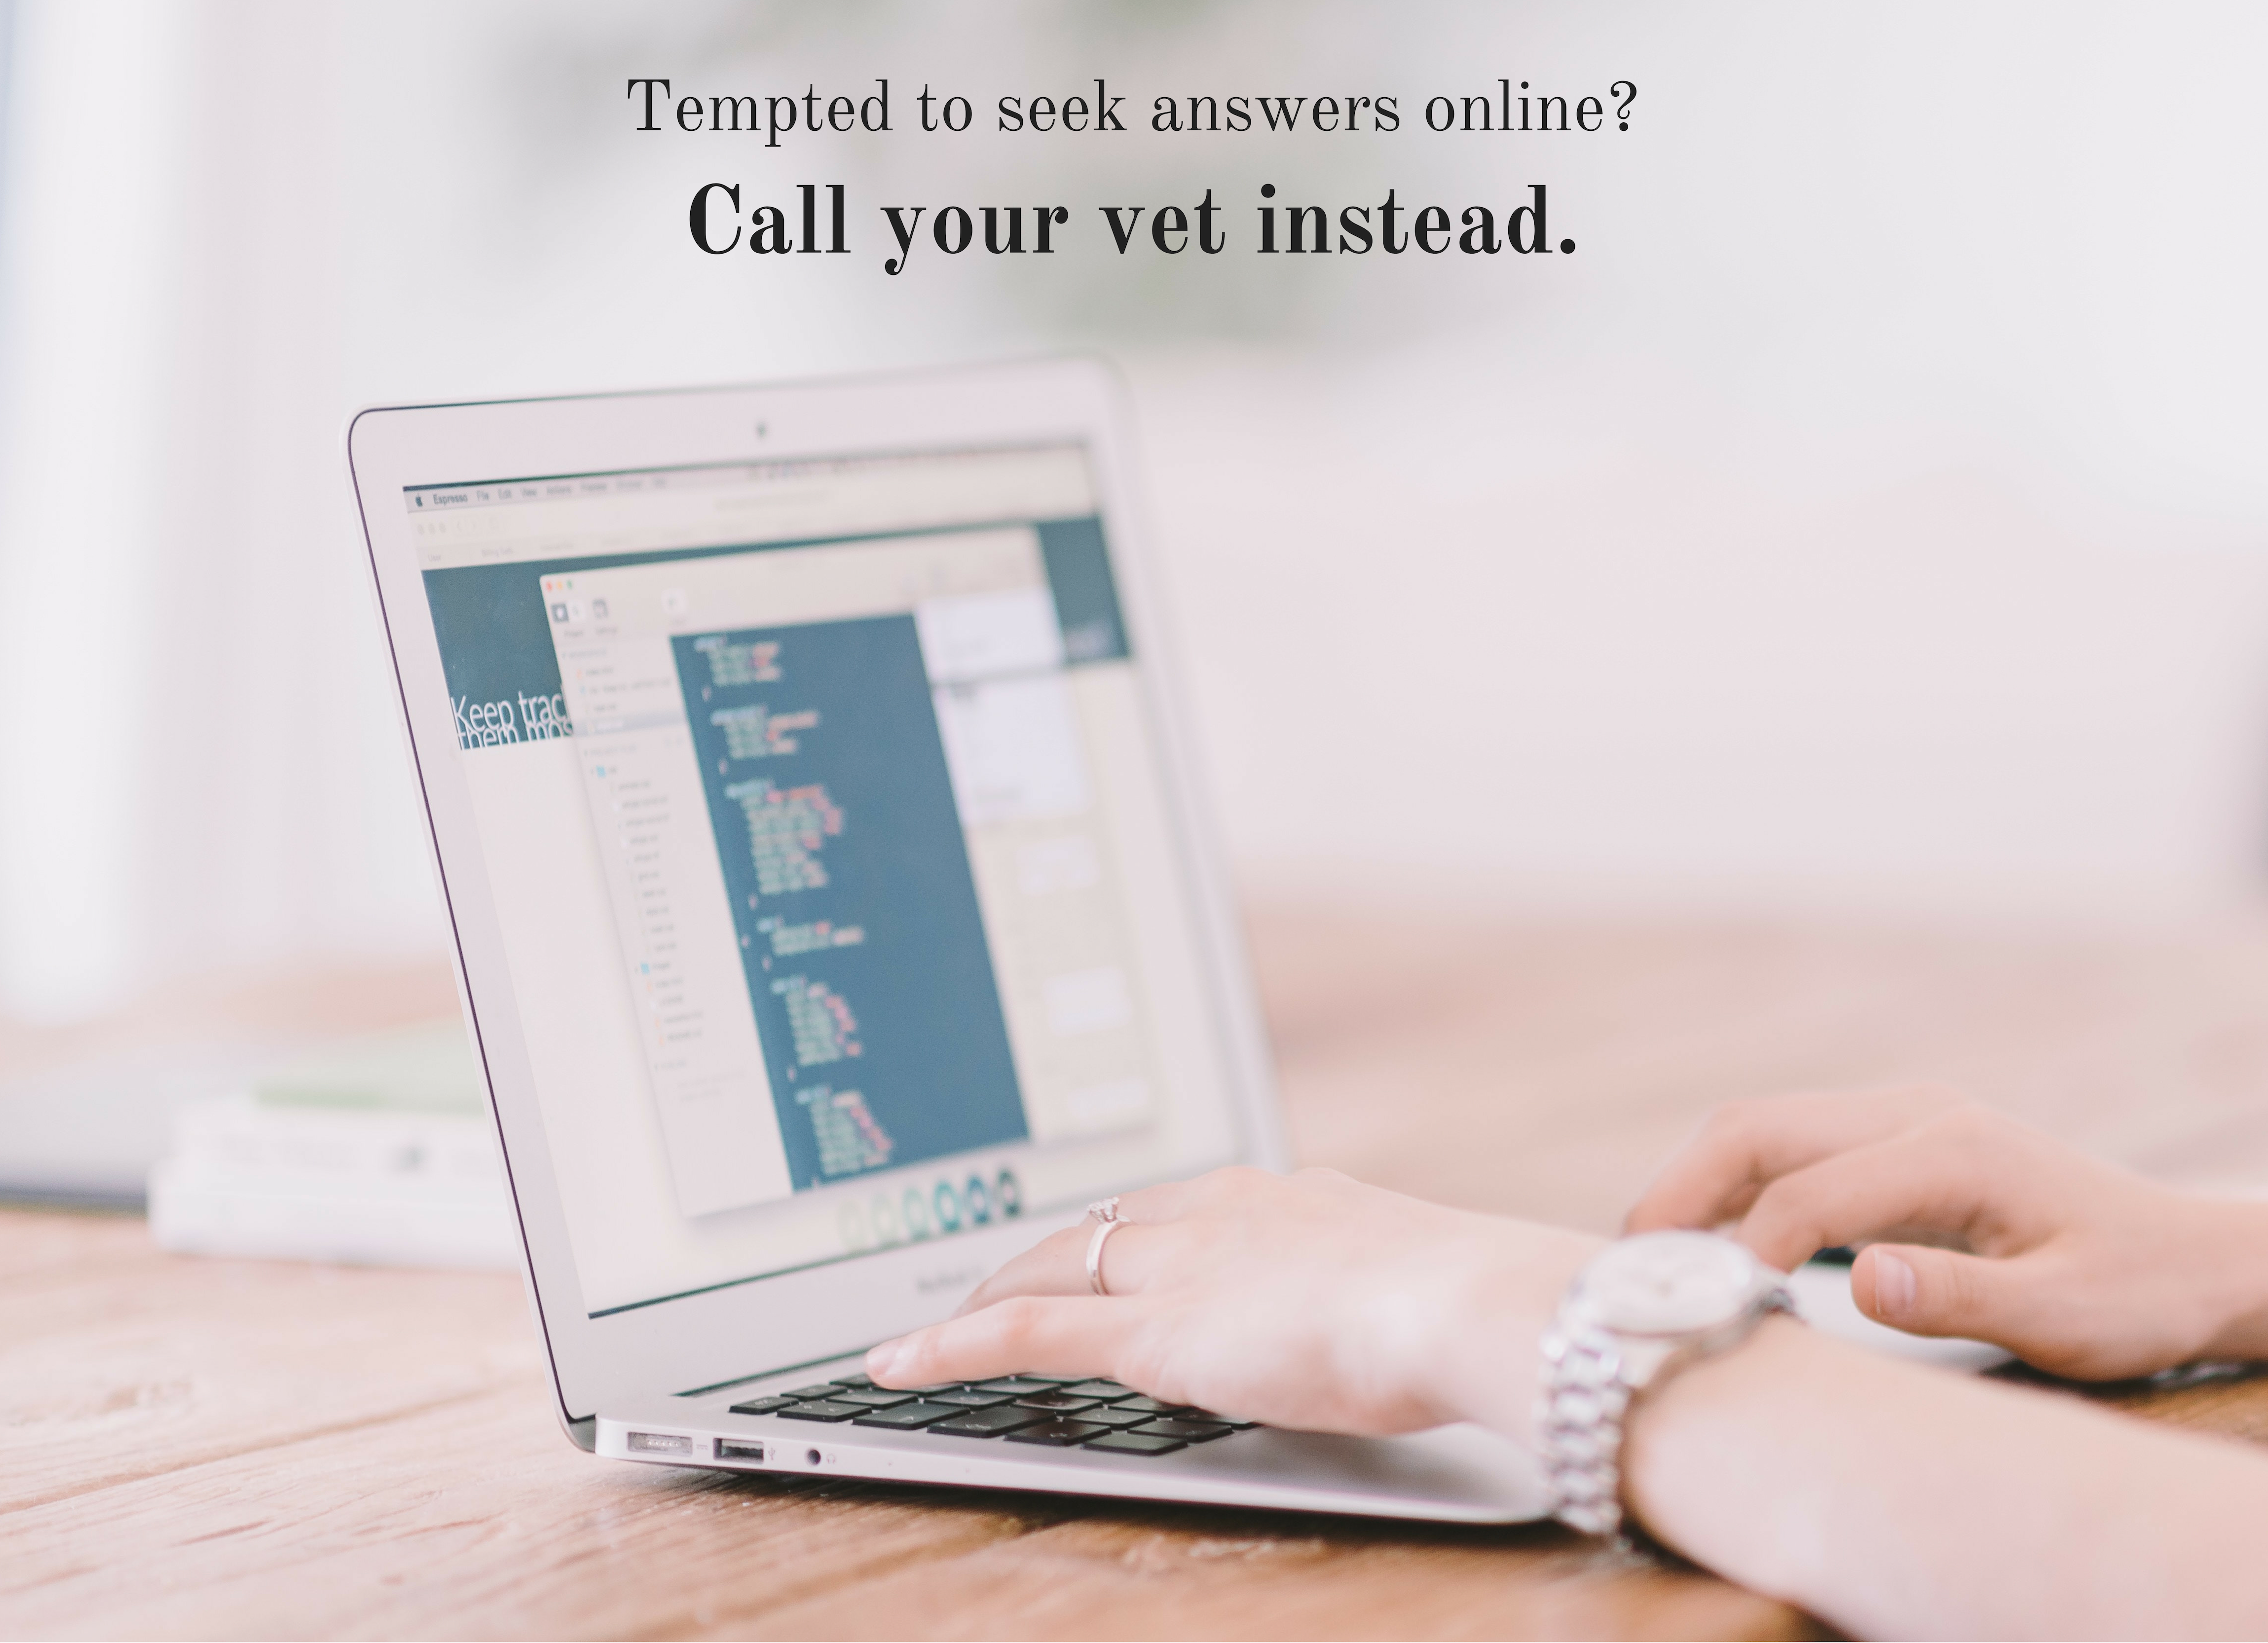 Tempted to seek answers online? Call your vet instead.